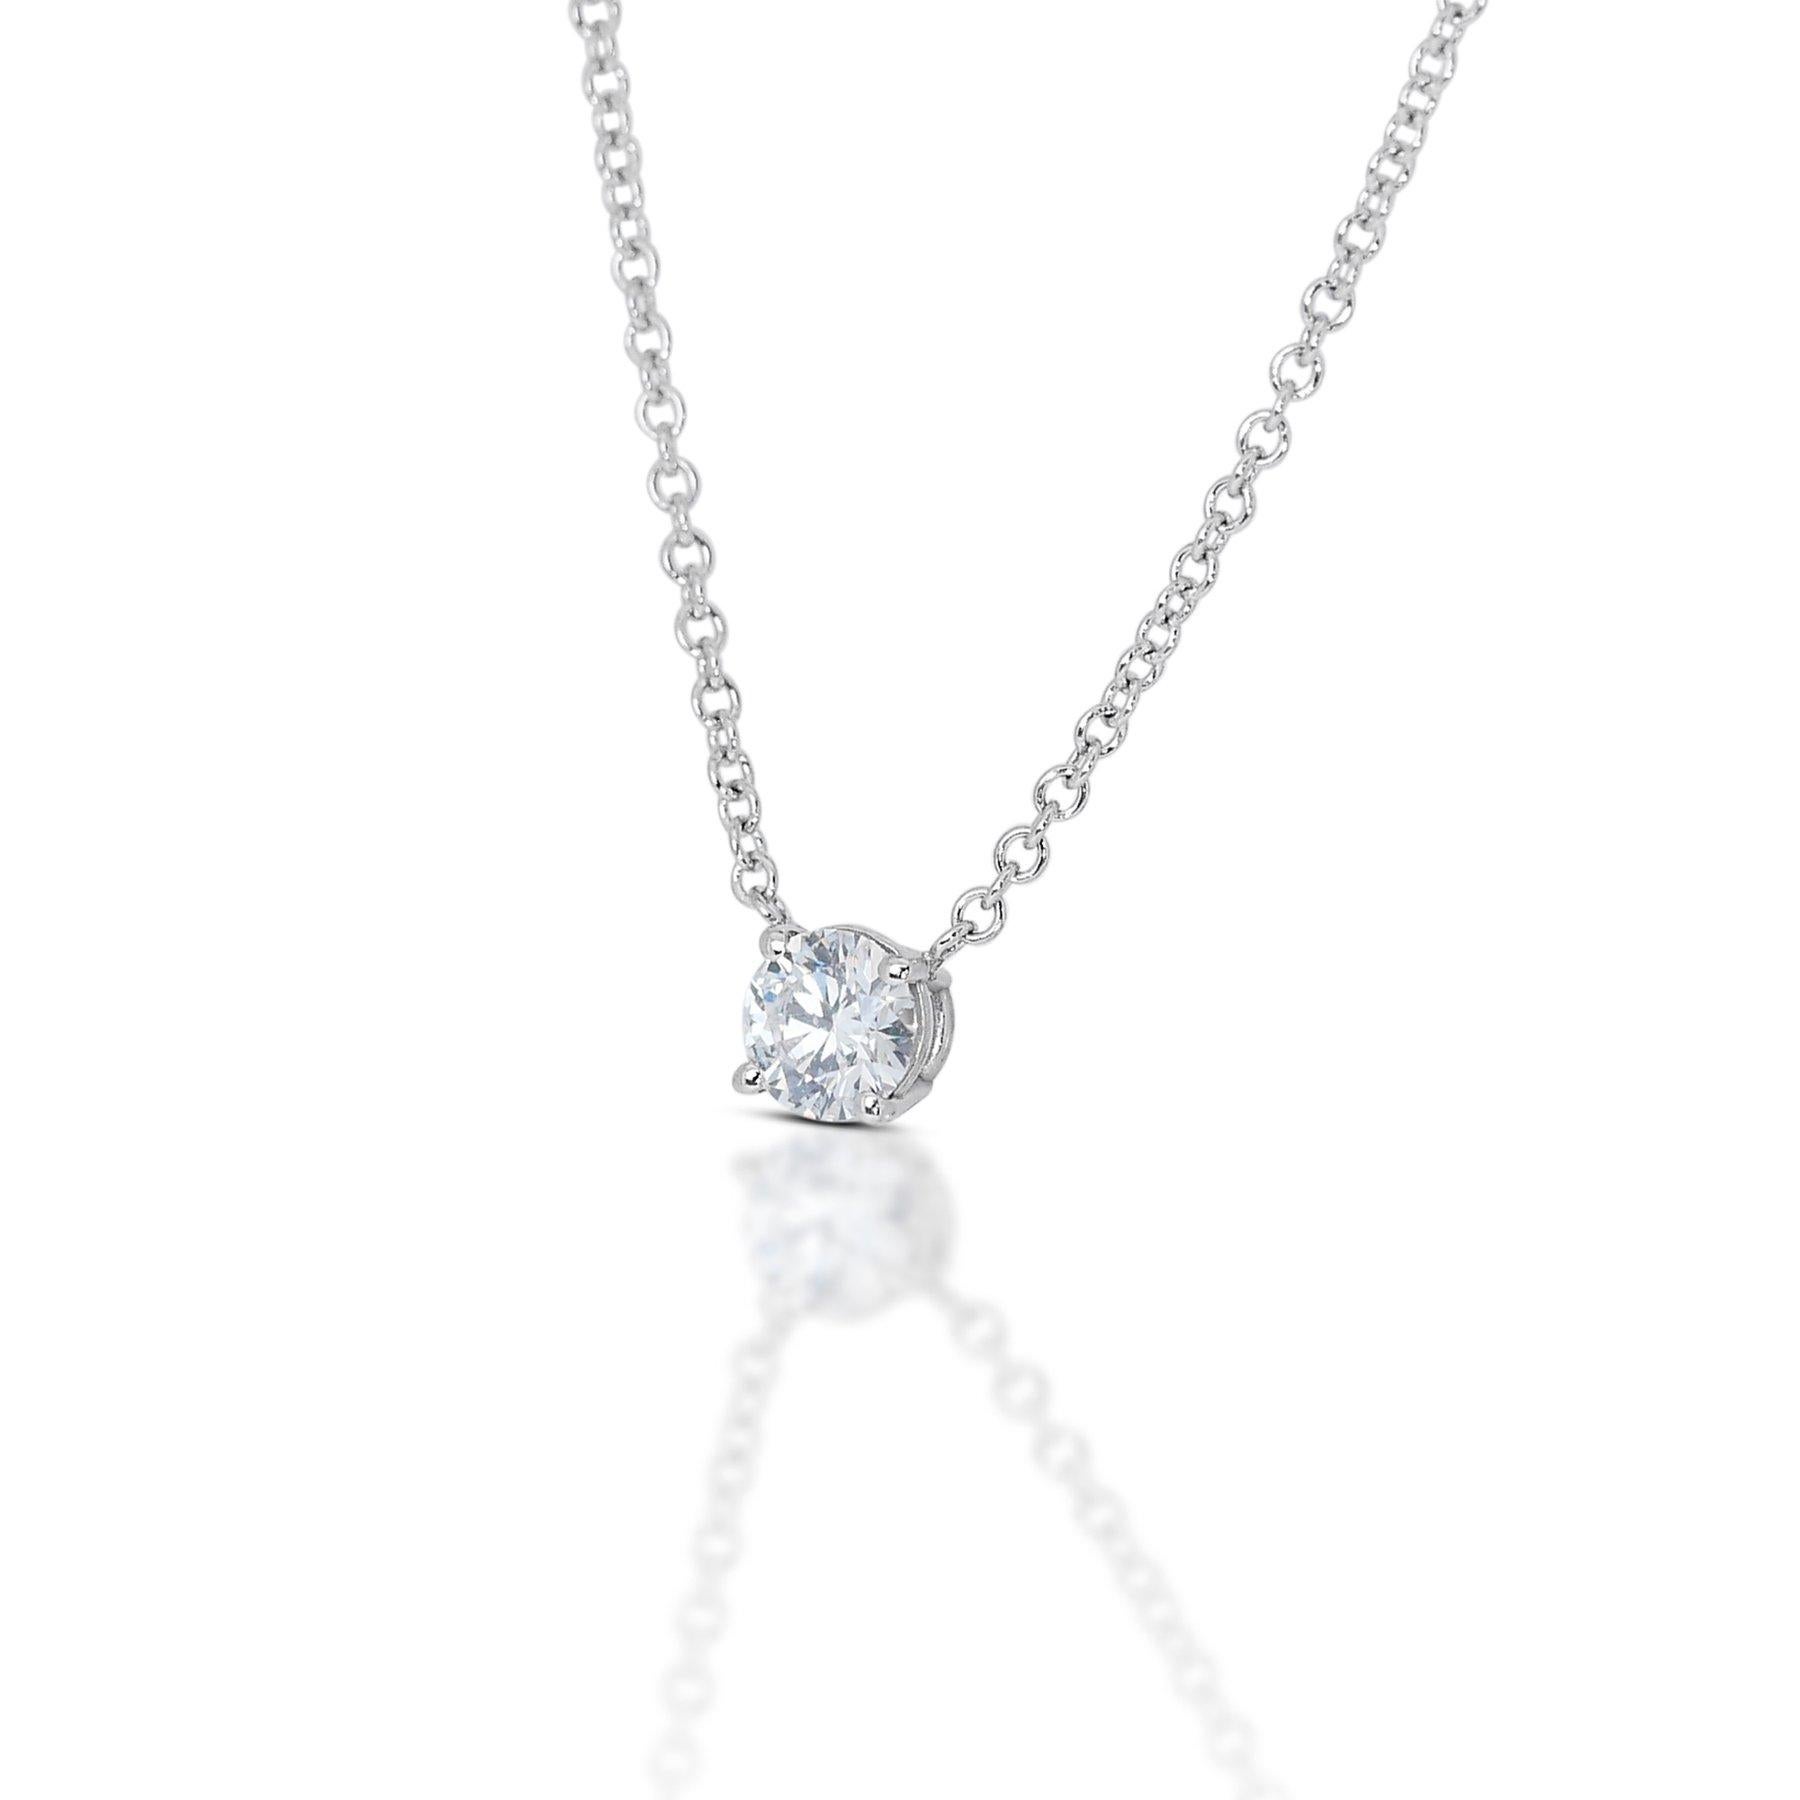 Capture the spotlight with this breathtaking necklace, a delicate dance of light around a captivating 0.32 carat round diamond. Its coveted D color sparkles with pure brilliance, amplified by the exceptional SI1 clarity that guarantees minimal